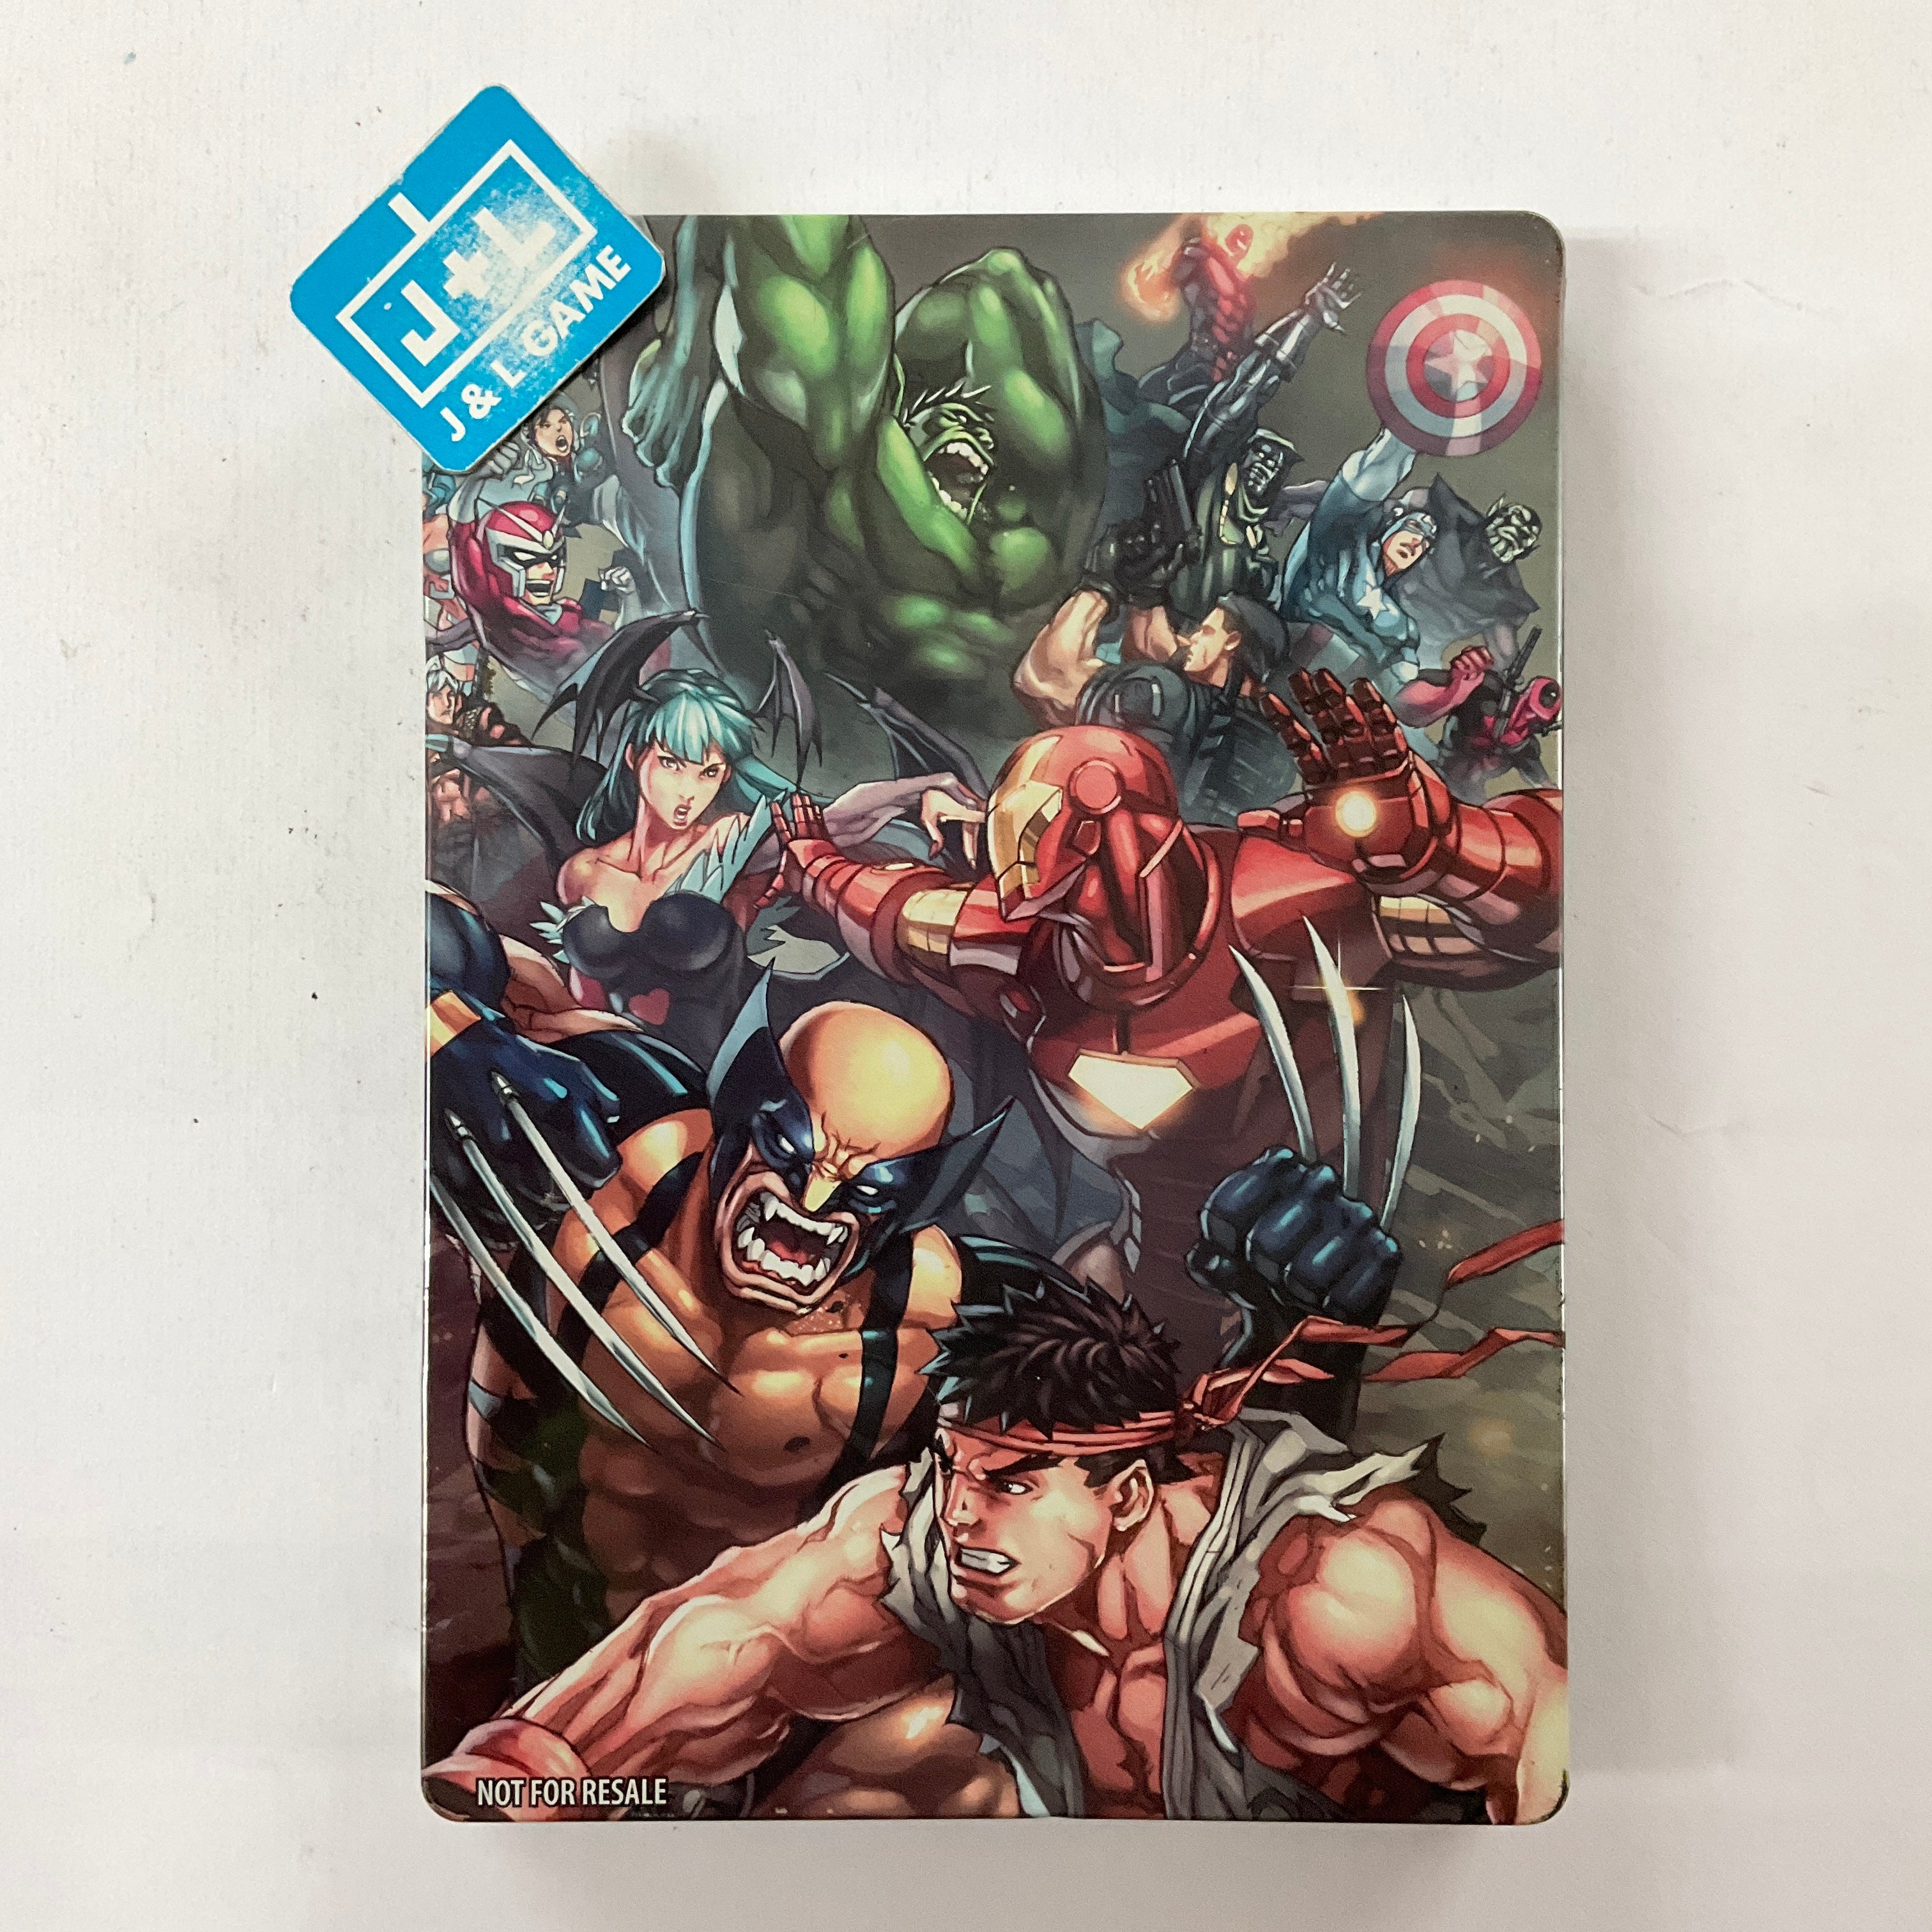 Marvel vs. Capcom 3: Fate of Two Worlds (Special Edition) - Xbox 360 [Pre-Owned] Video Games Capcom   